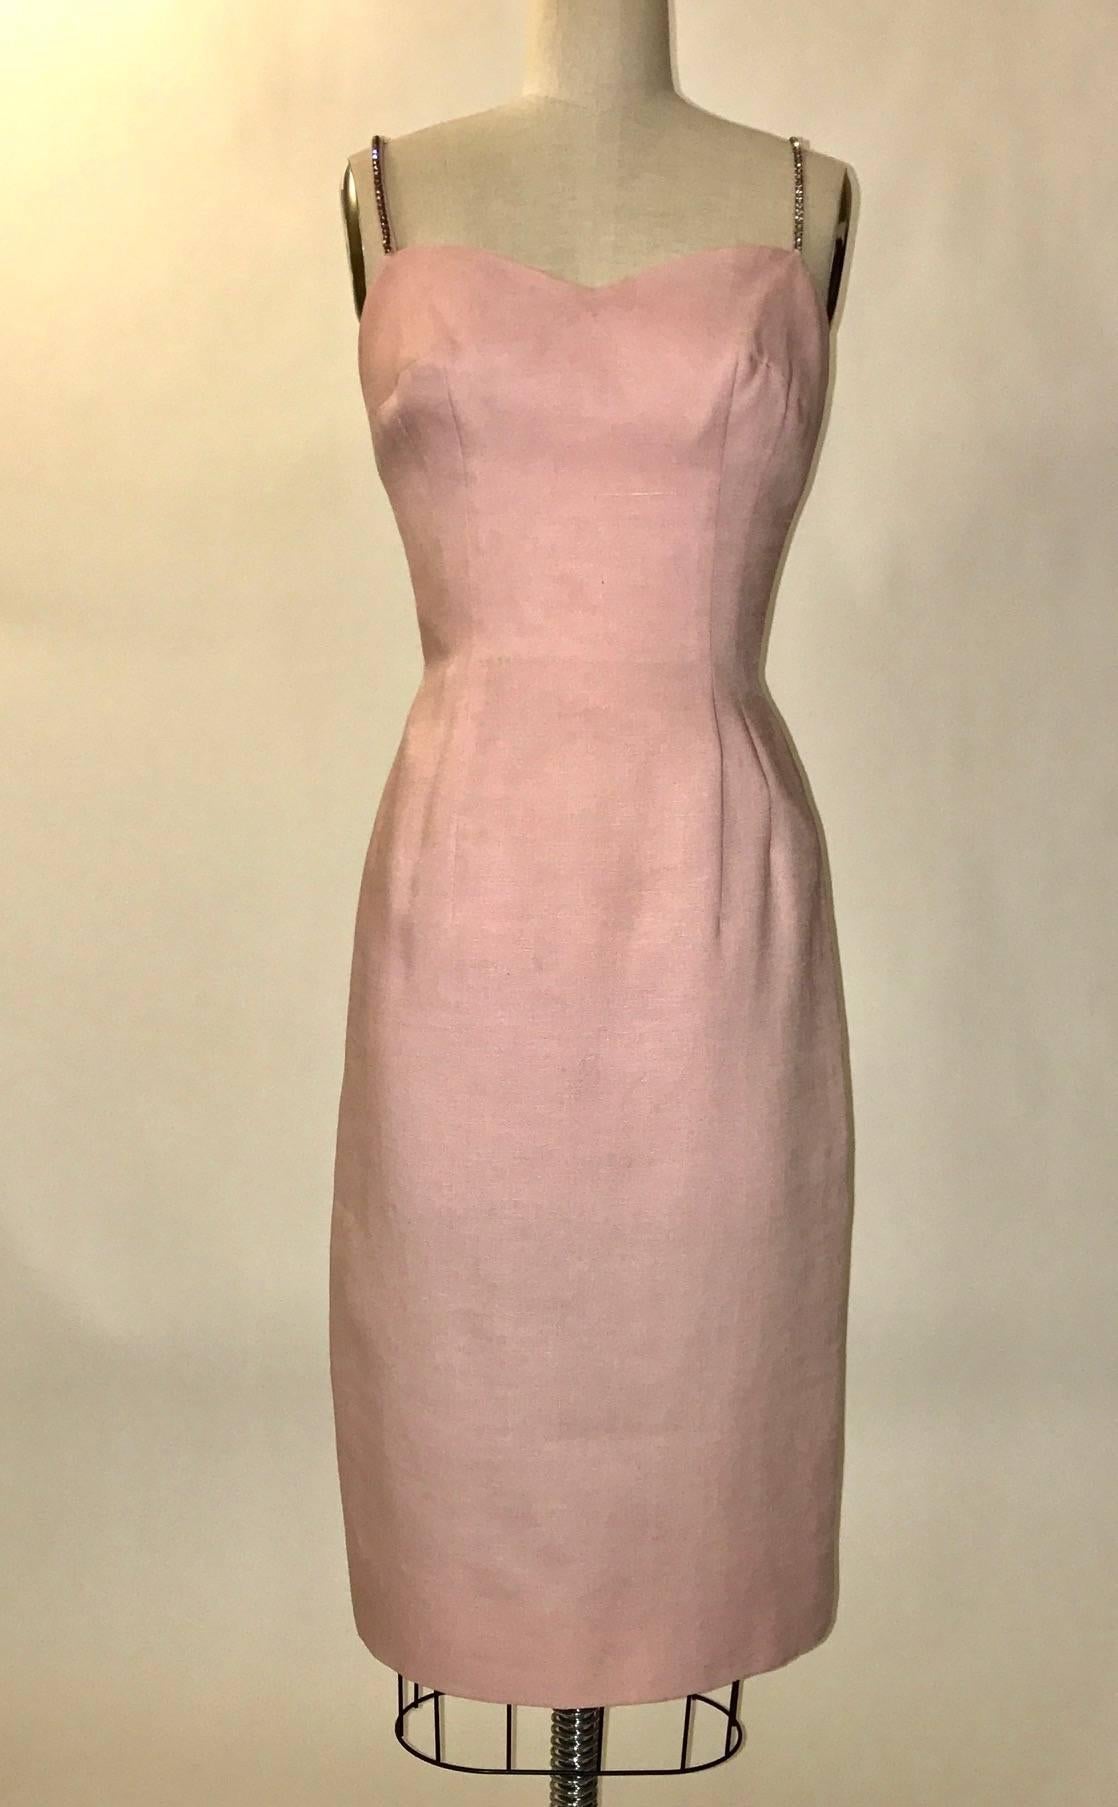 Mr. Blackwell blush pink linen wiggle dress from the late 50s or early 60s with rhinestone embellished straps. Fishtail skirt back with two more layers of cascading fabric falling at back. Back zip, bow at top with snap fastener. 

Lined at top.